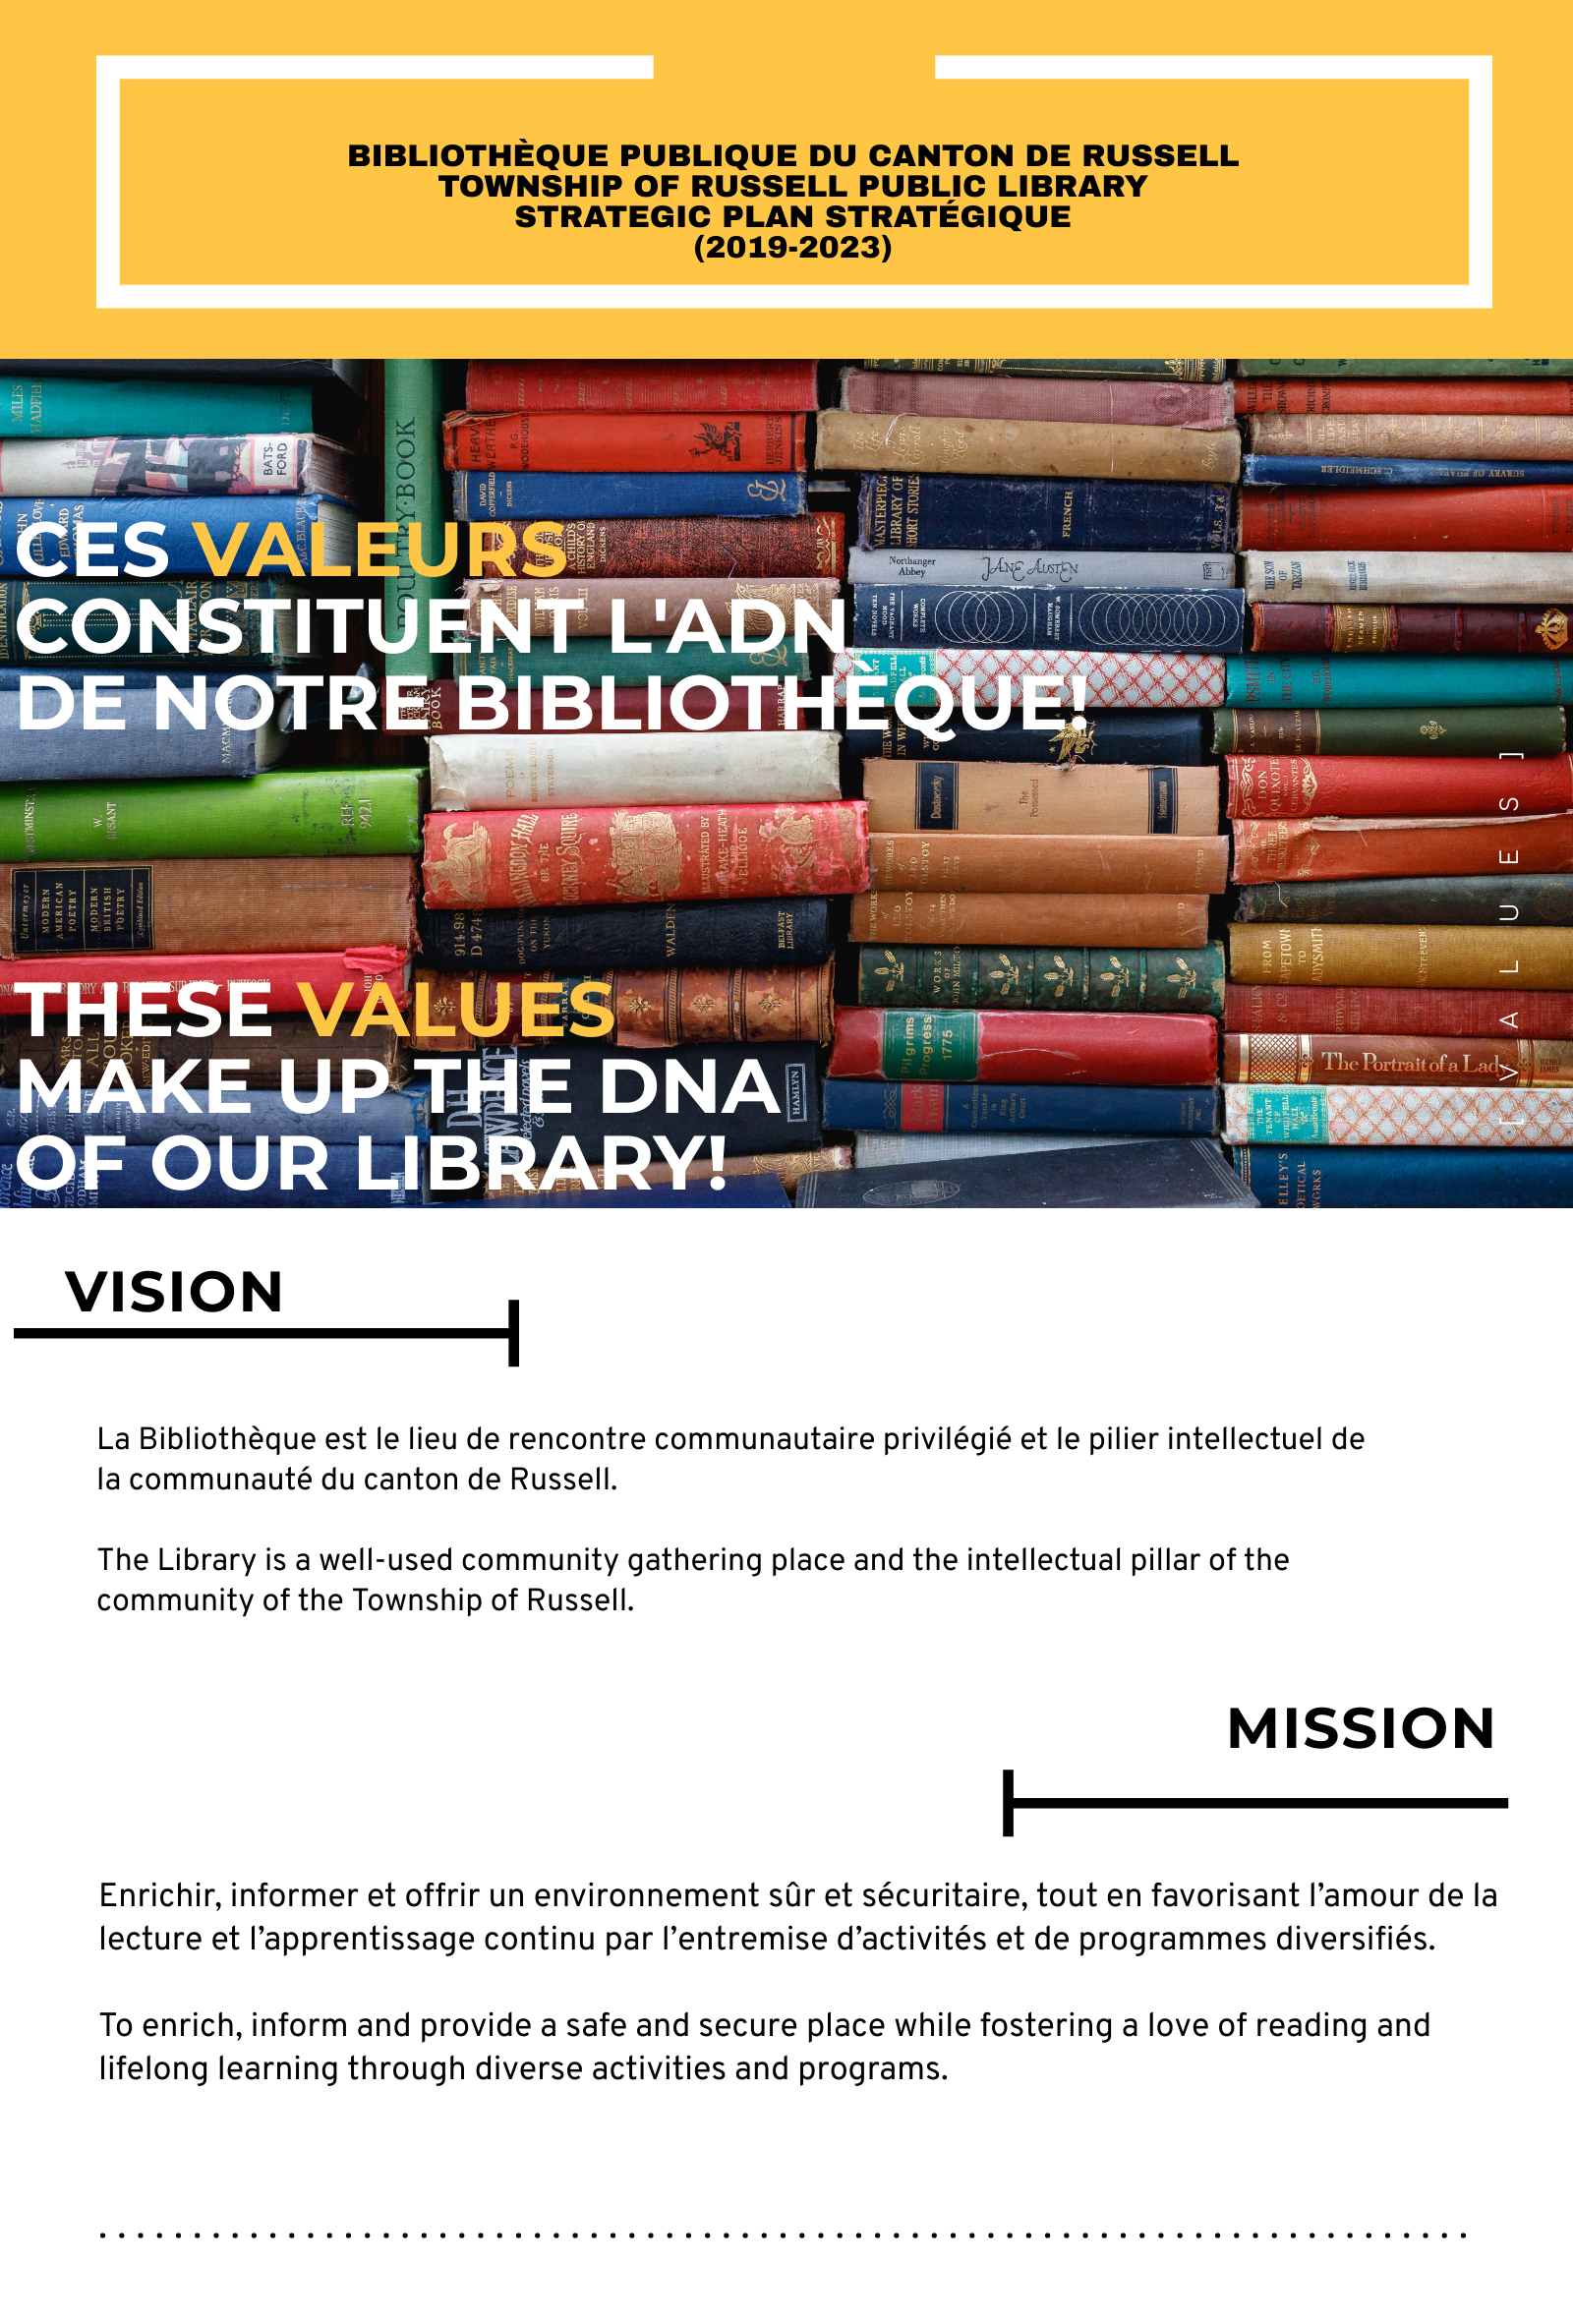 Chart of Library MVG (mission, vision, goals)